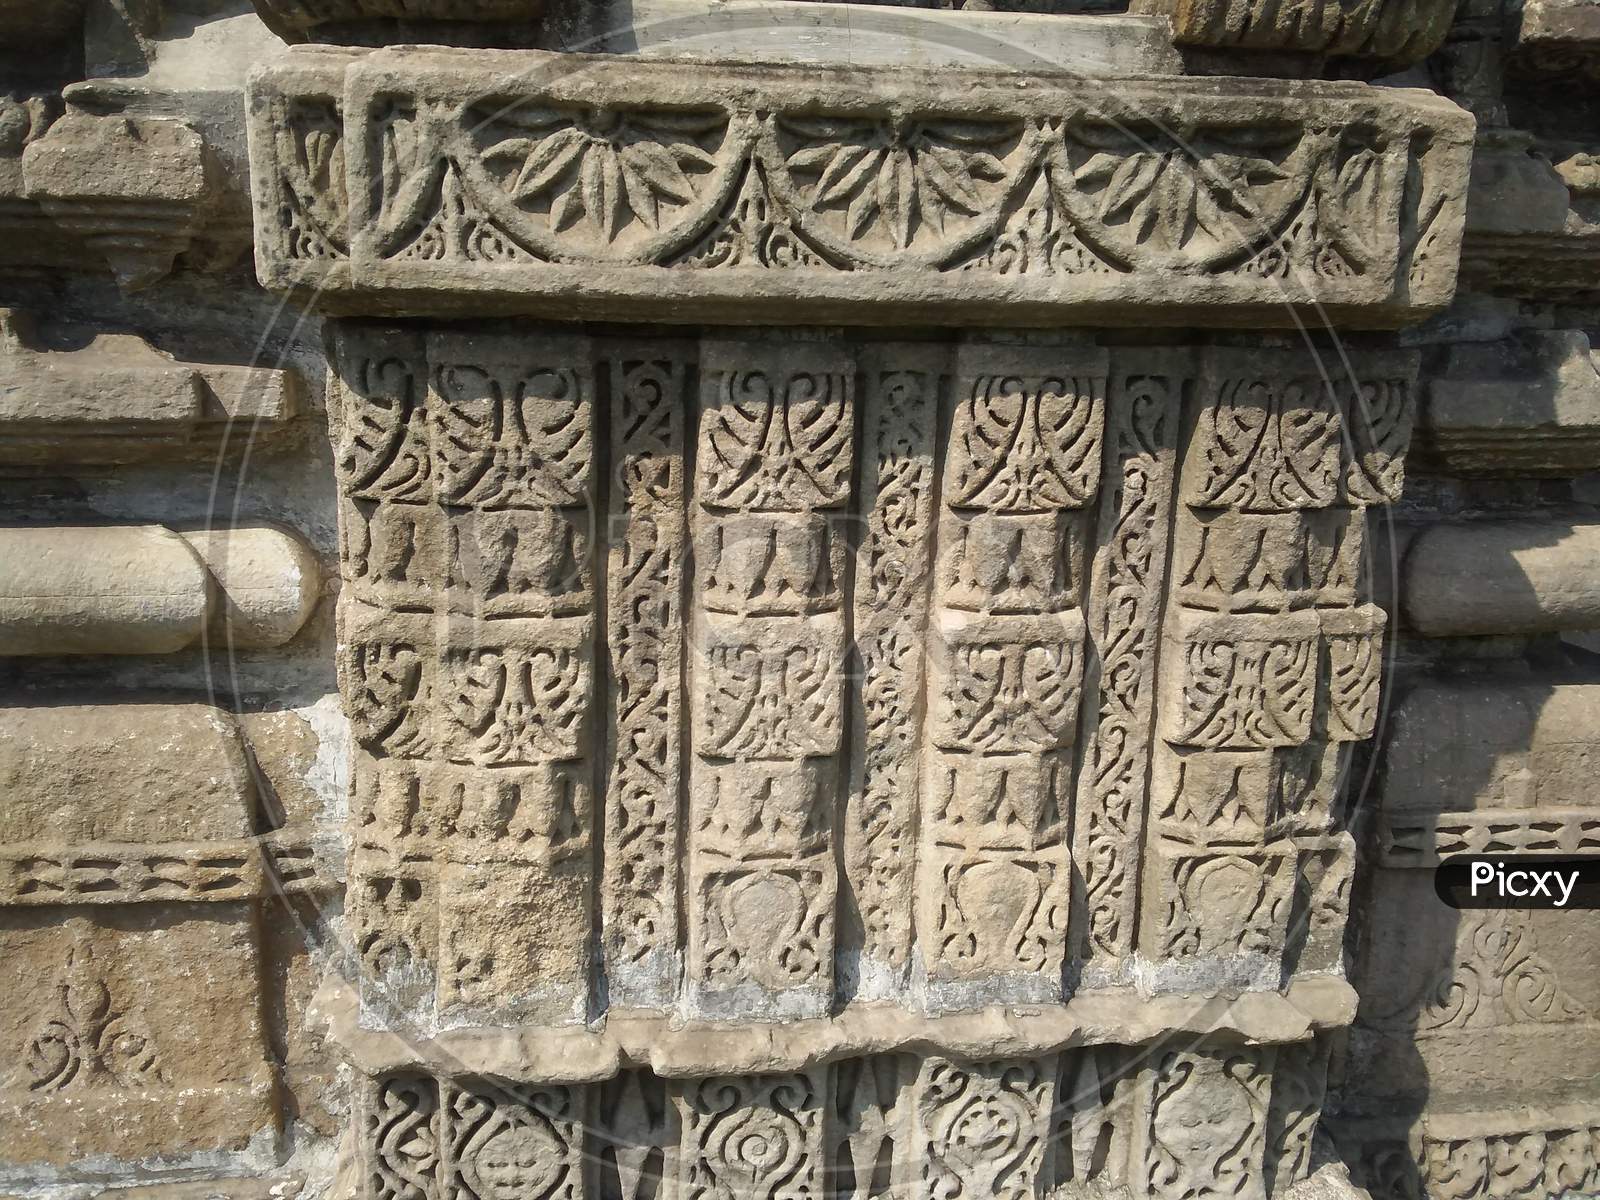 Old Hindu temple from pavagad chapaner Gujarat